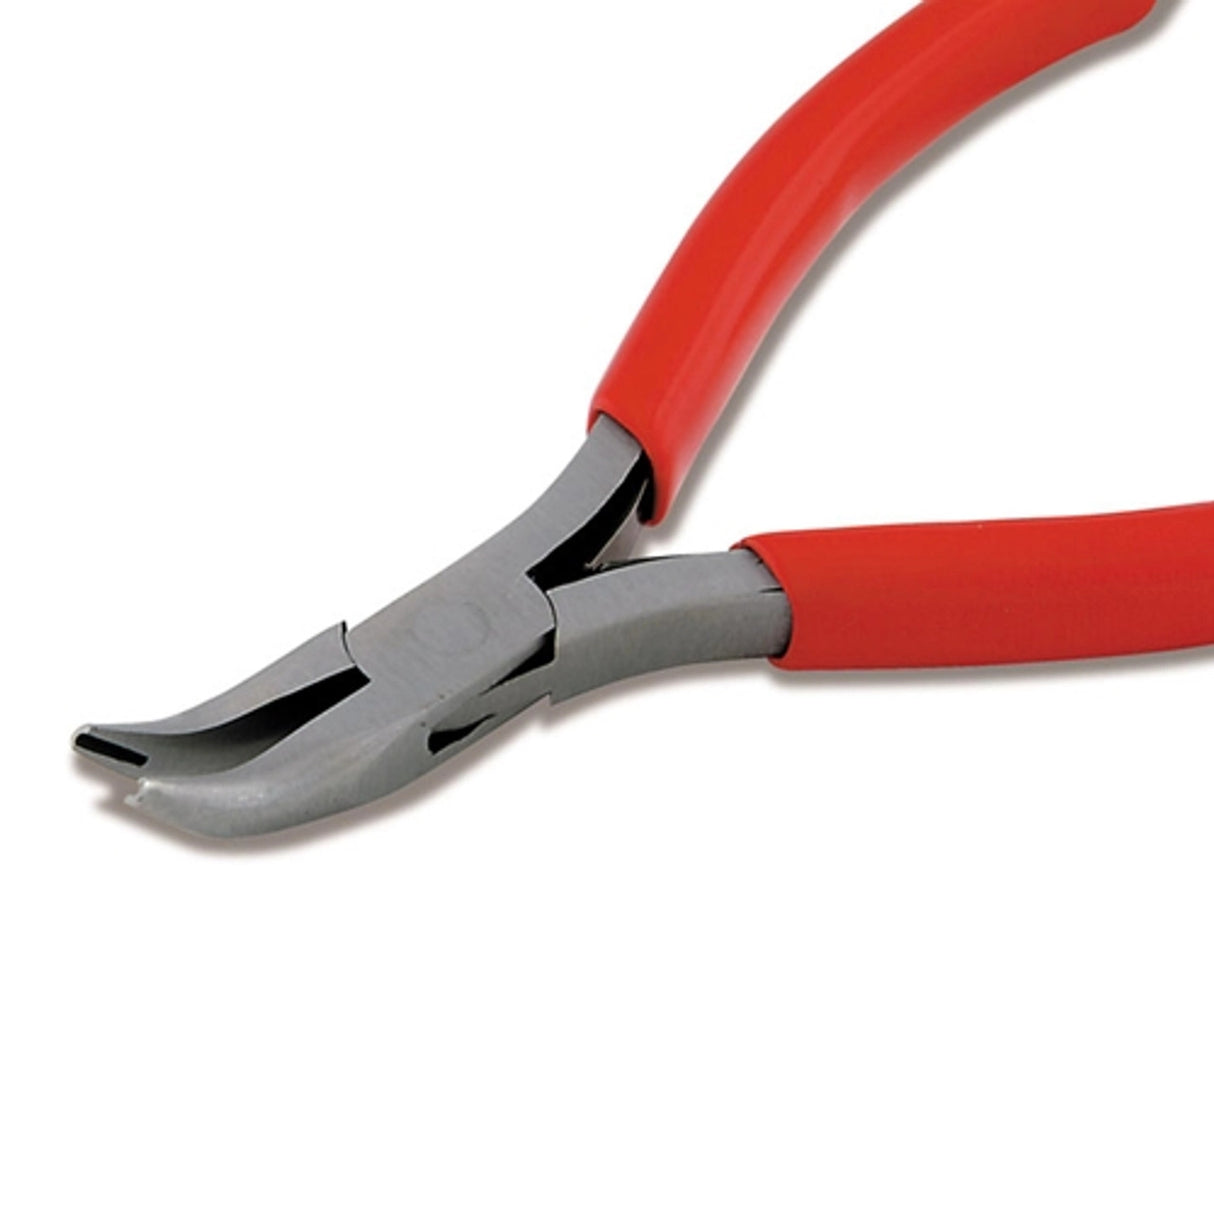 Prong Closing Pliers